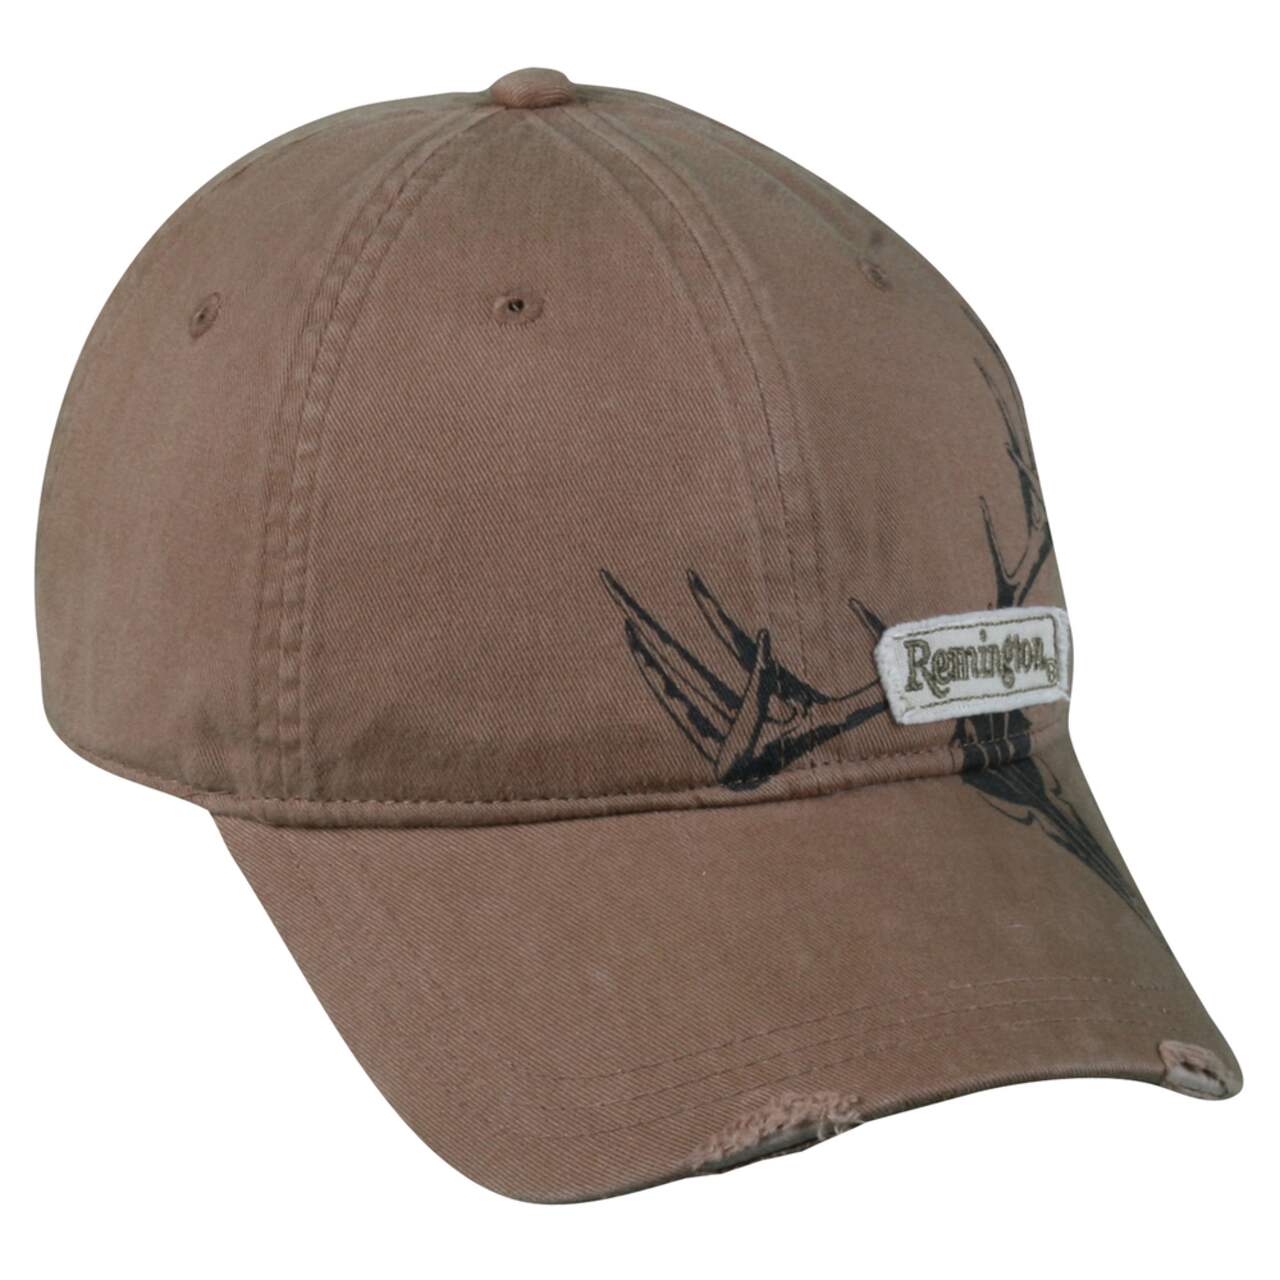 https://media-www.canadiantire.ca/product/playing/hunting/hunting-apparel-footwear/0751483/assorted-hat-2-63dce110-2391-4a3f-9a37-60f86e88454c.png?imdensity=1&imwidth=640&impolicy=mZoom